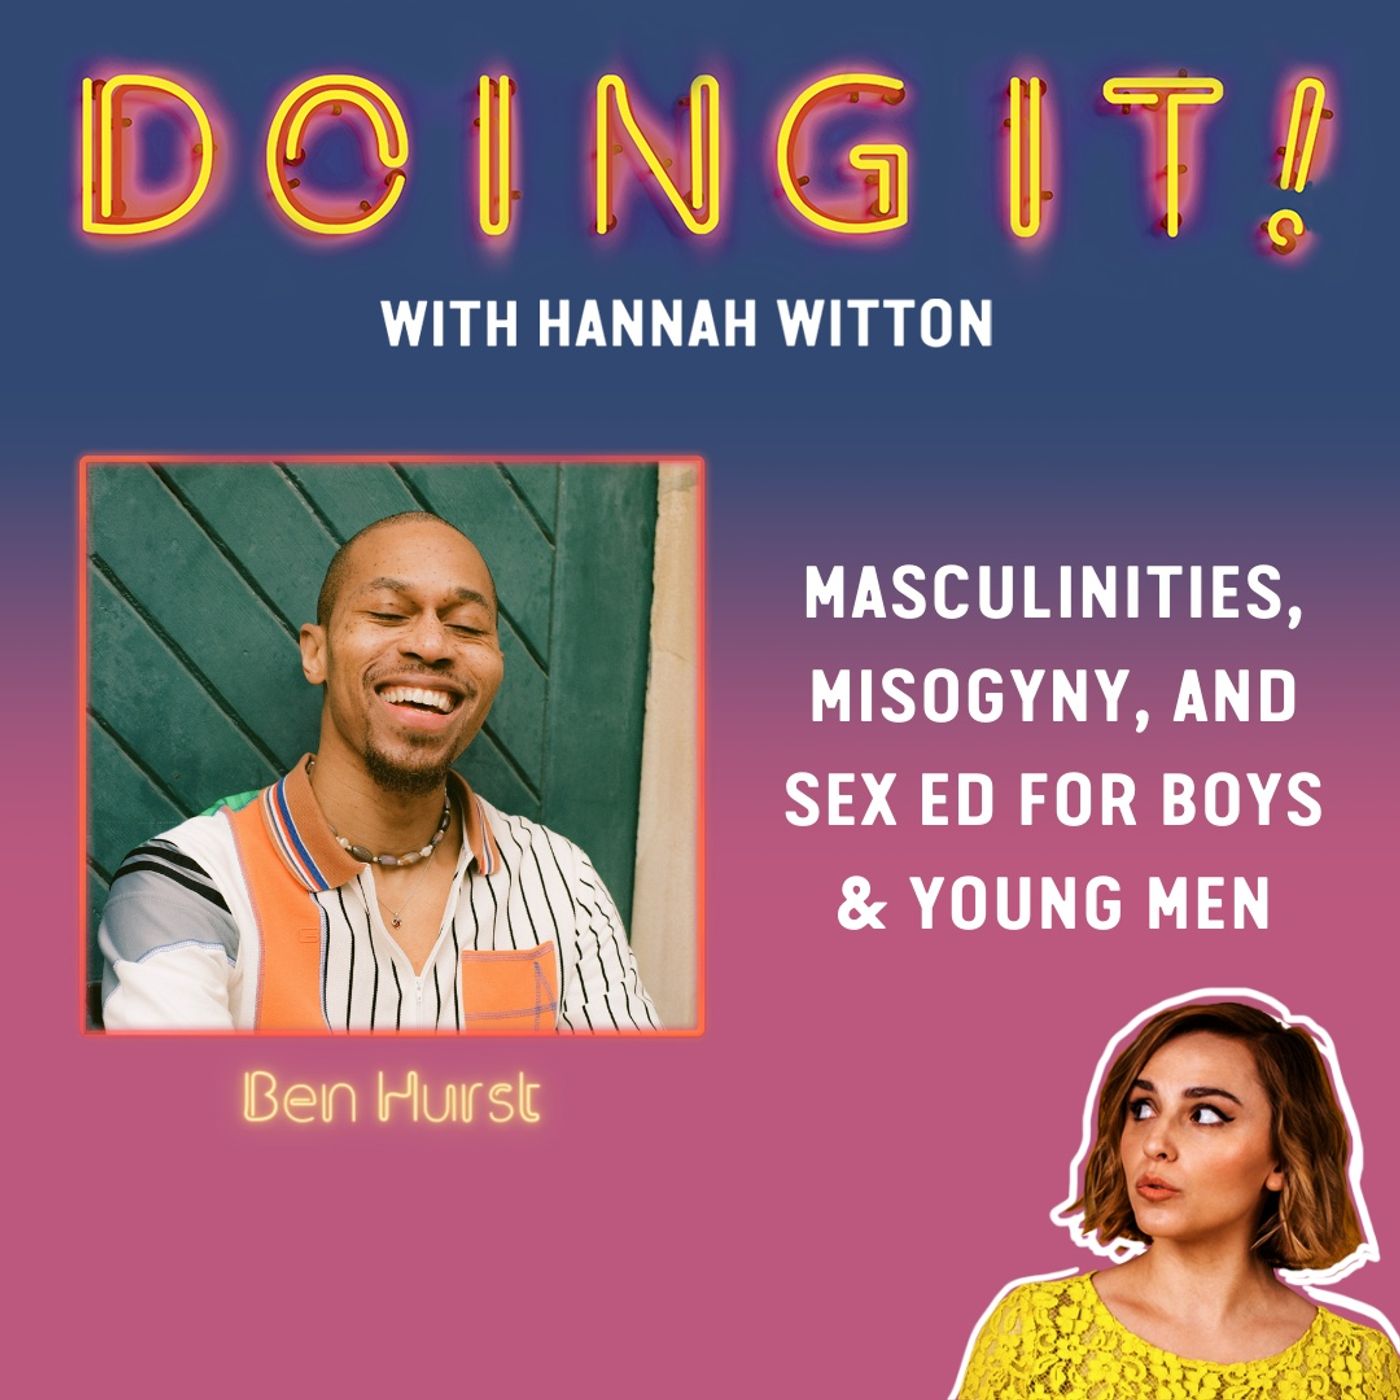 Masculinities, Misogyny and Sex Ed for Boys & Young Men with Ben Hurst